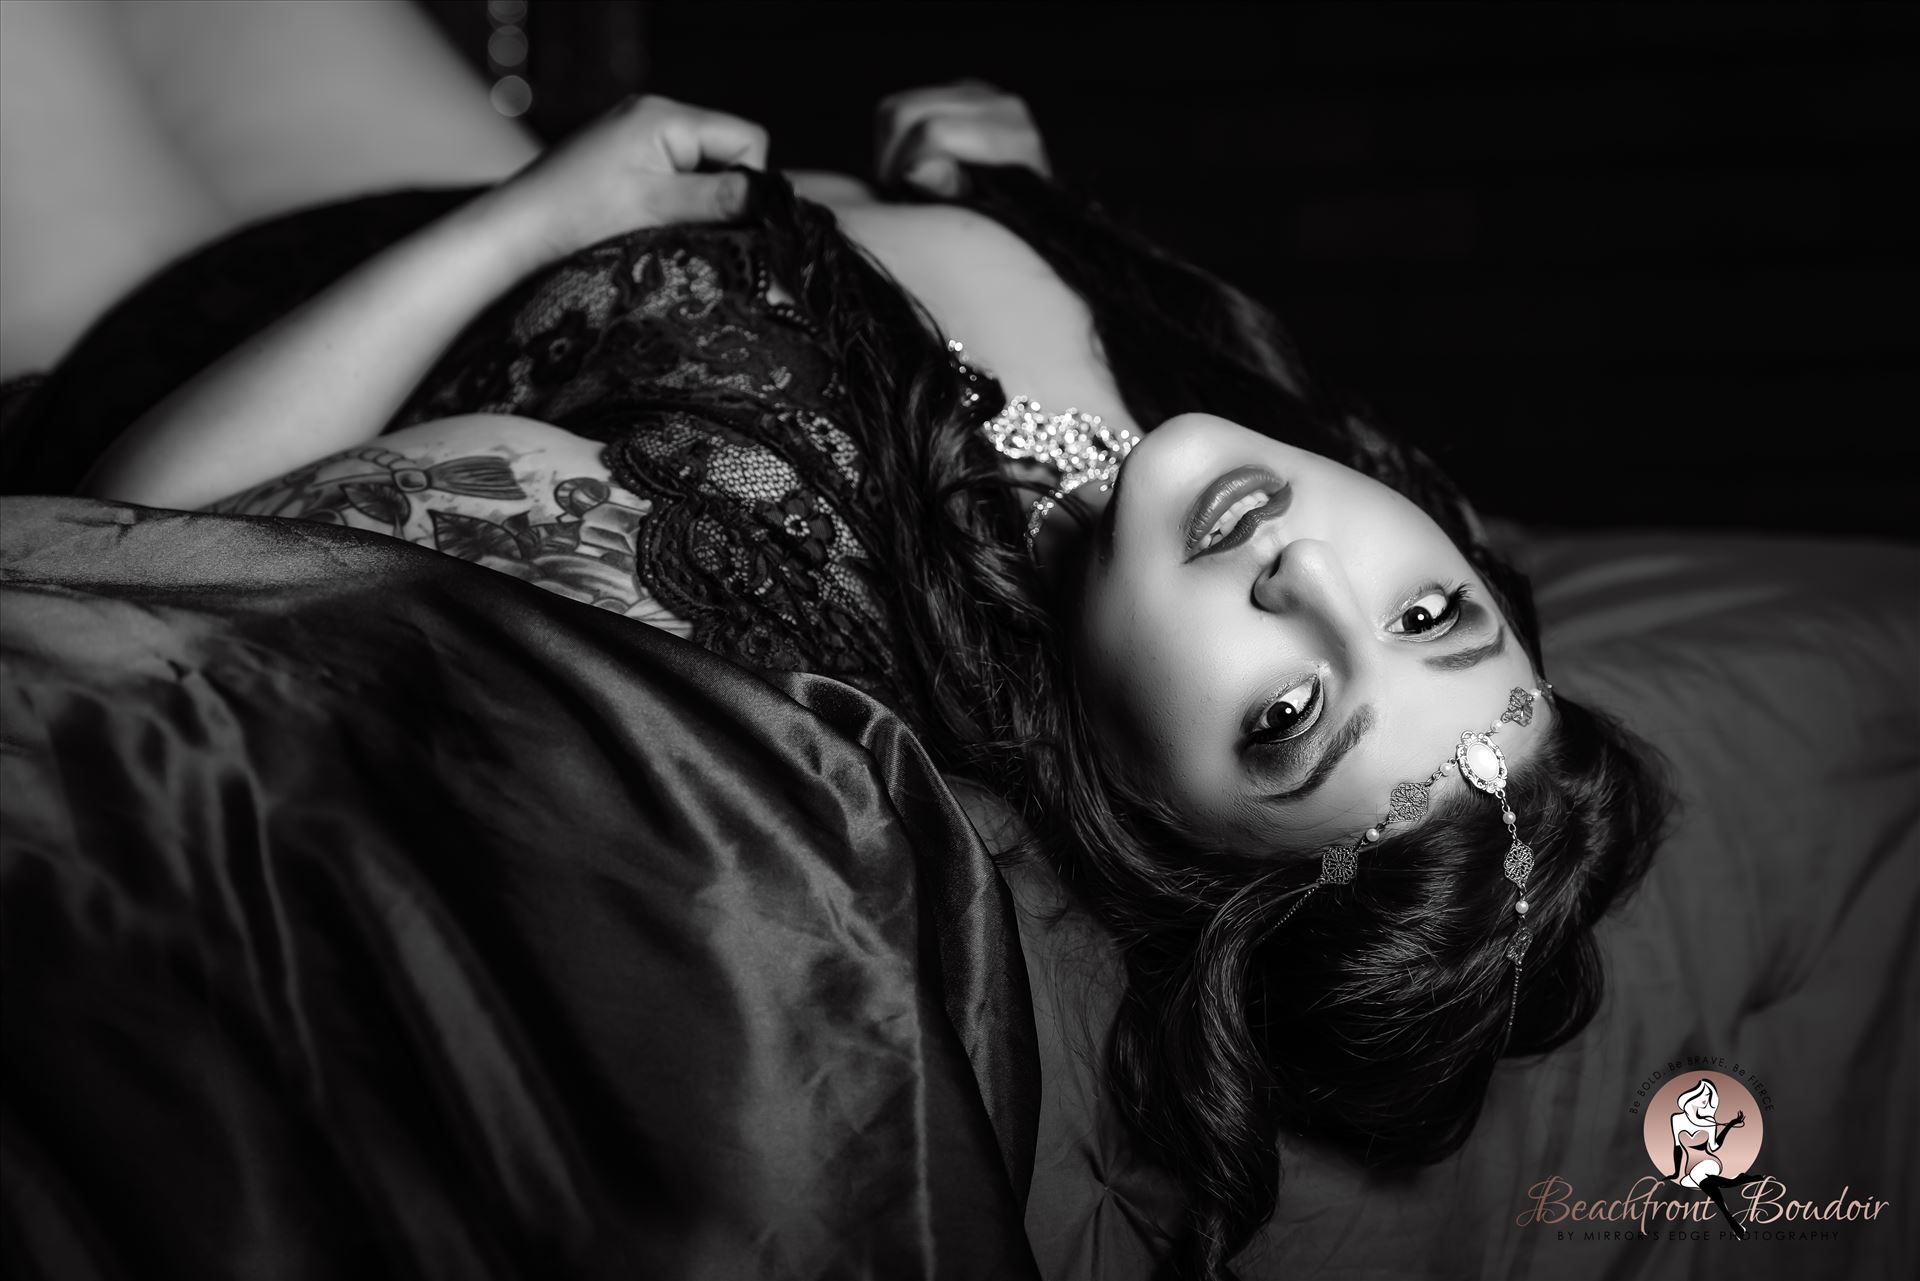 PortBW-7931.JPGBeachfront Boudoir by Mirror's Edge Photography is a Boutique Luxury Boudoir Photography Studio located in San Luis Obispo County. My mission is to show as many women as possible how beautiful they truly are! Best curvy boudoir poses